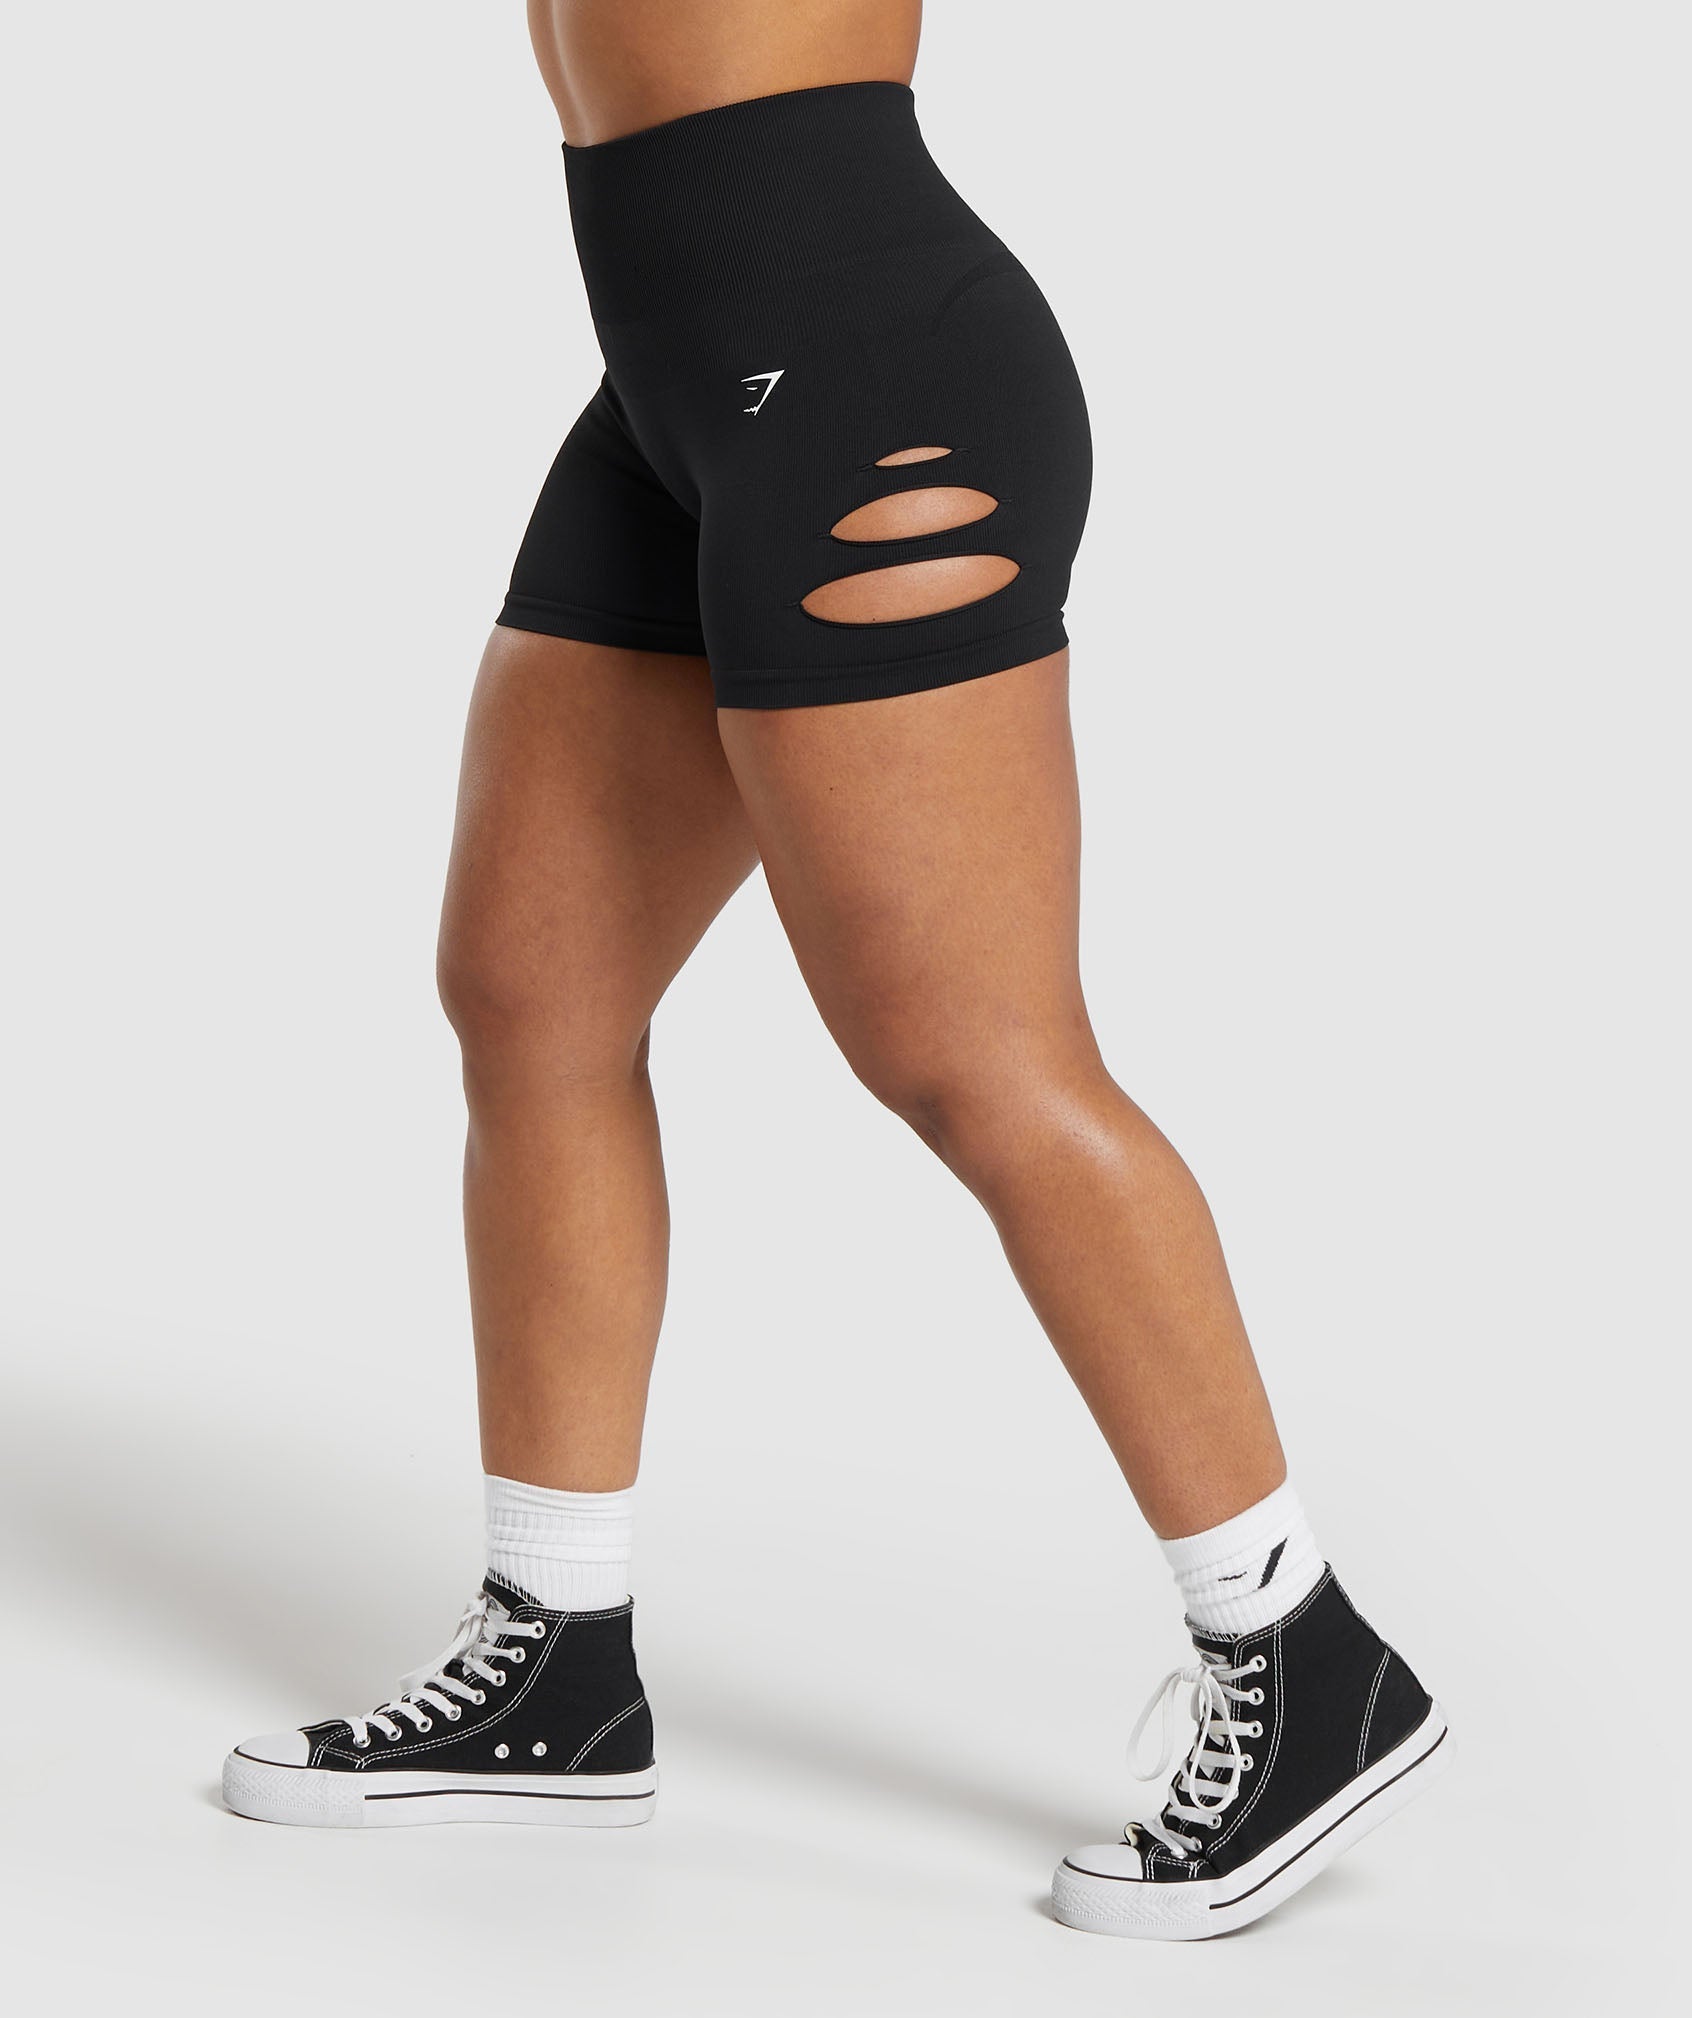 Gains Seamless Ripped Shorts in Black - view 1